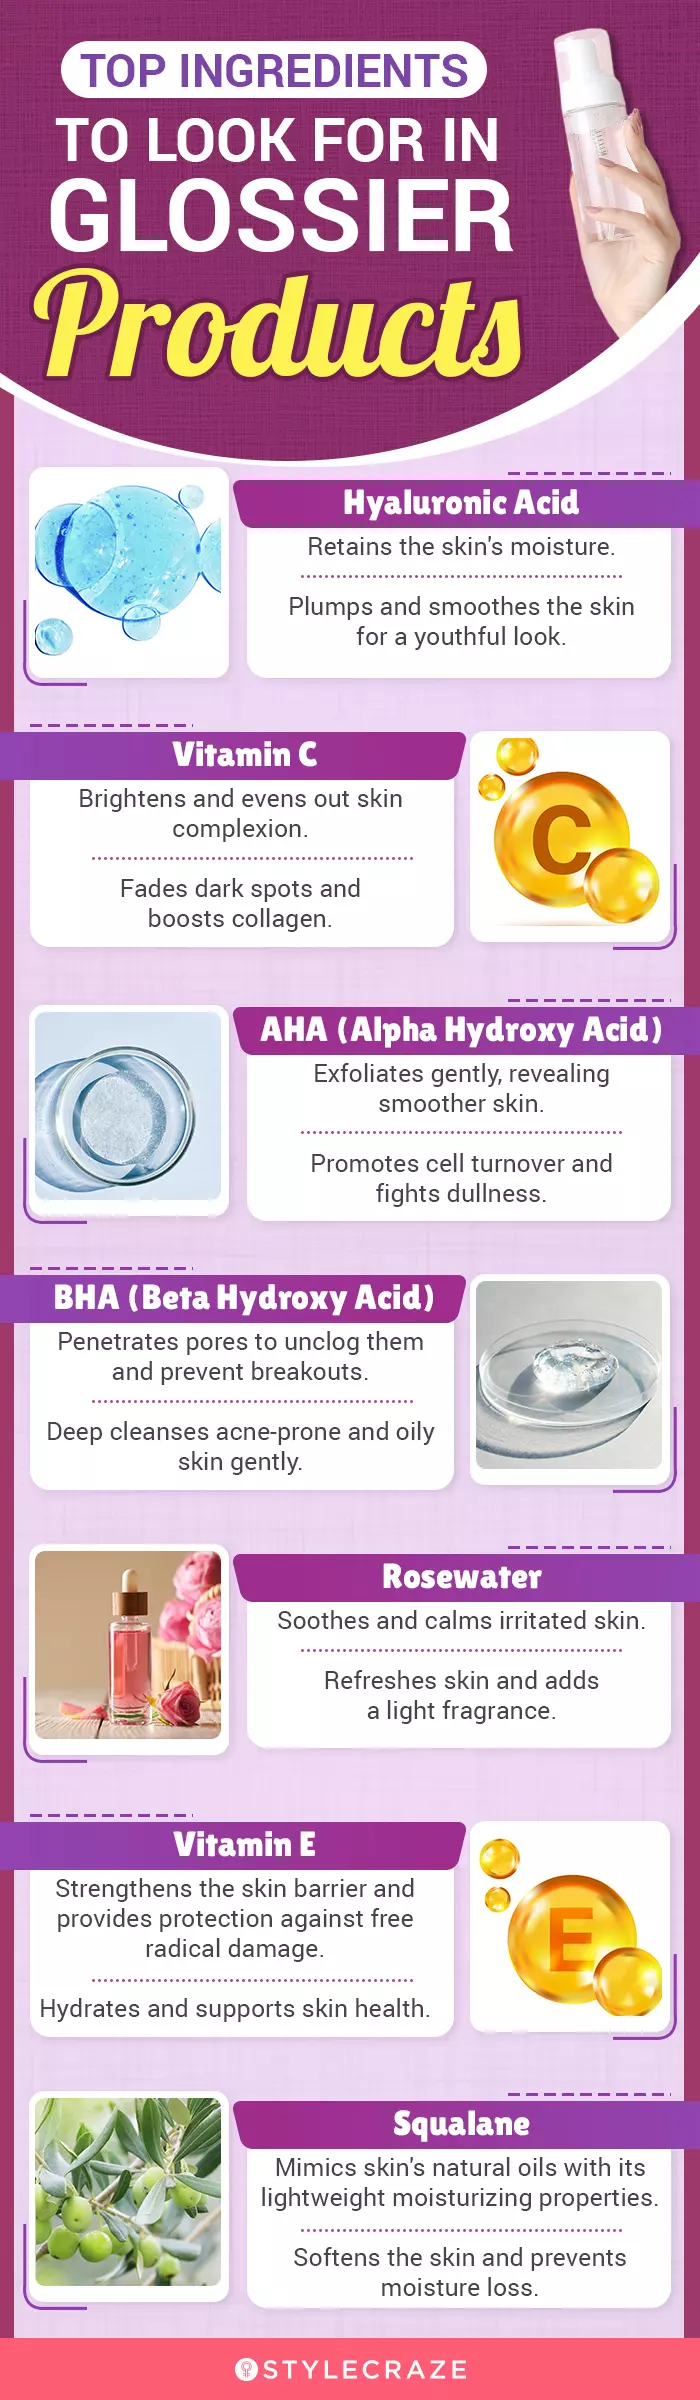 Top Ingredients To Look For In Glossier Products (infographic)